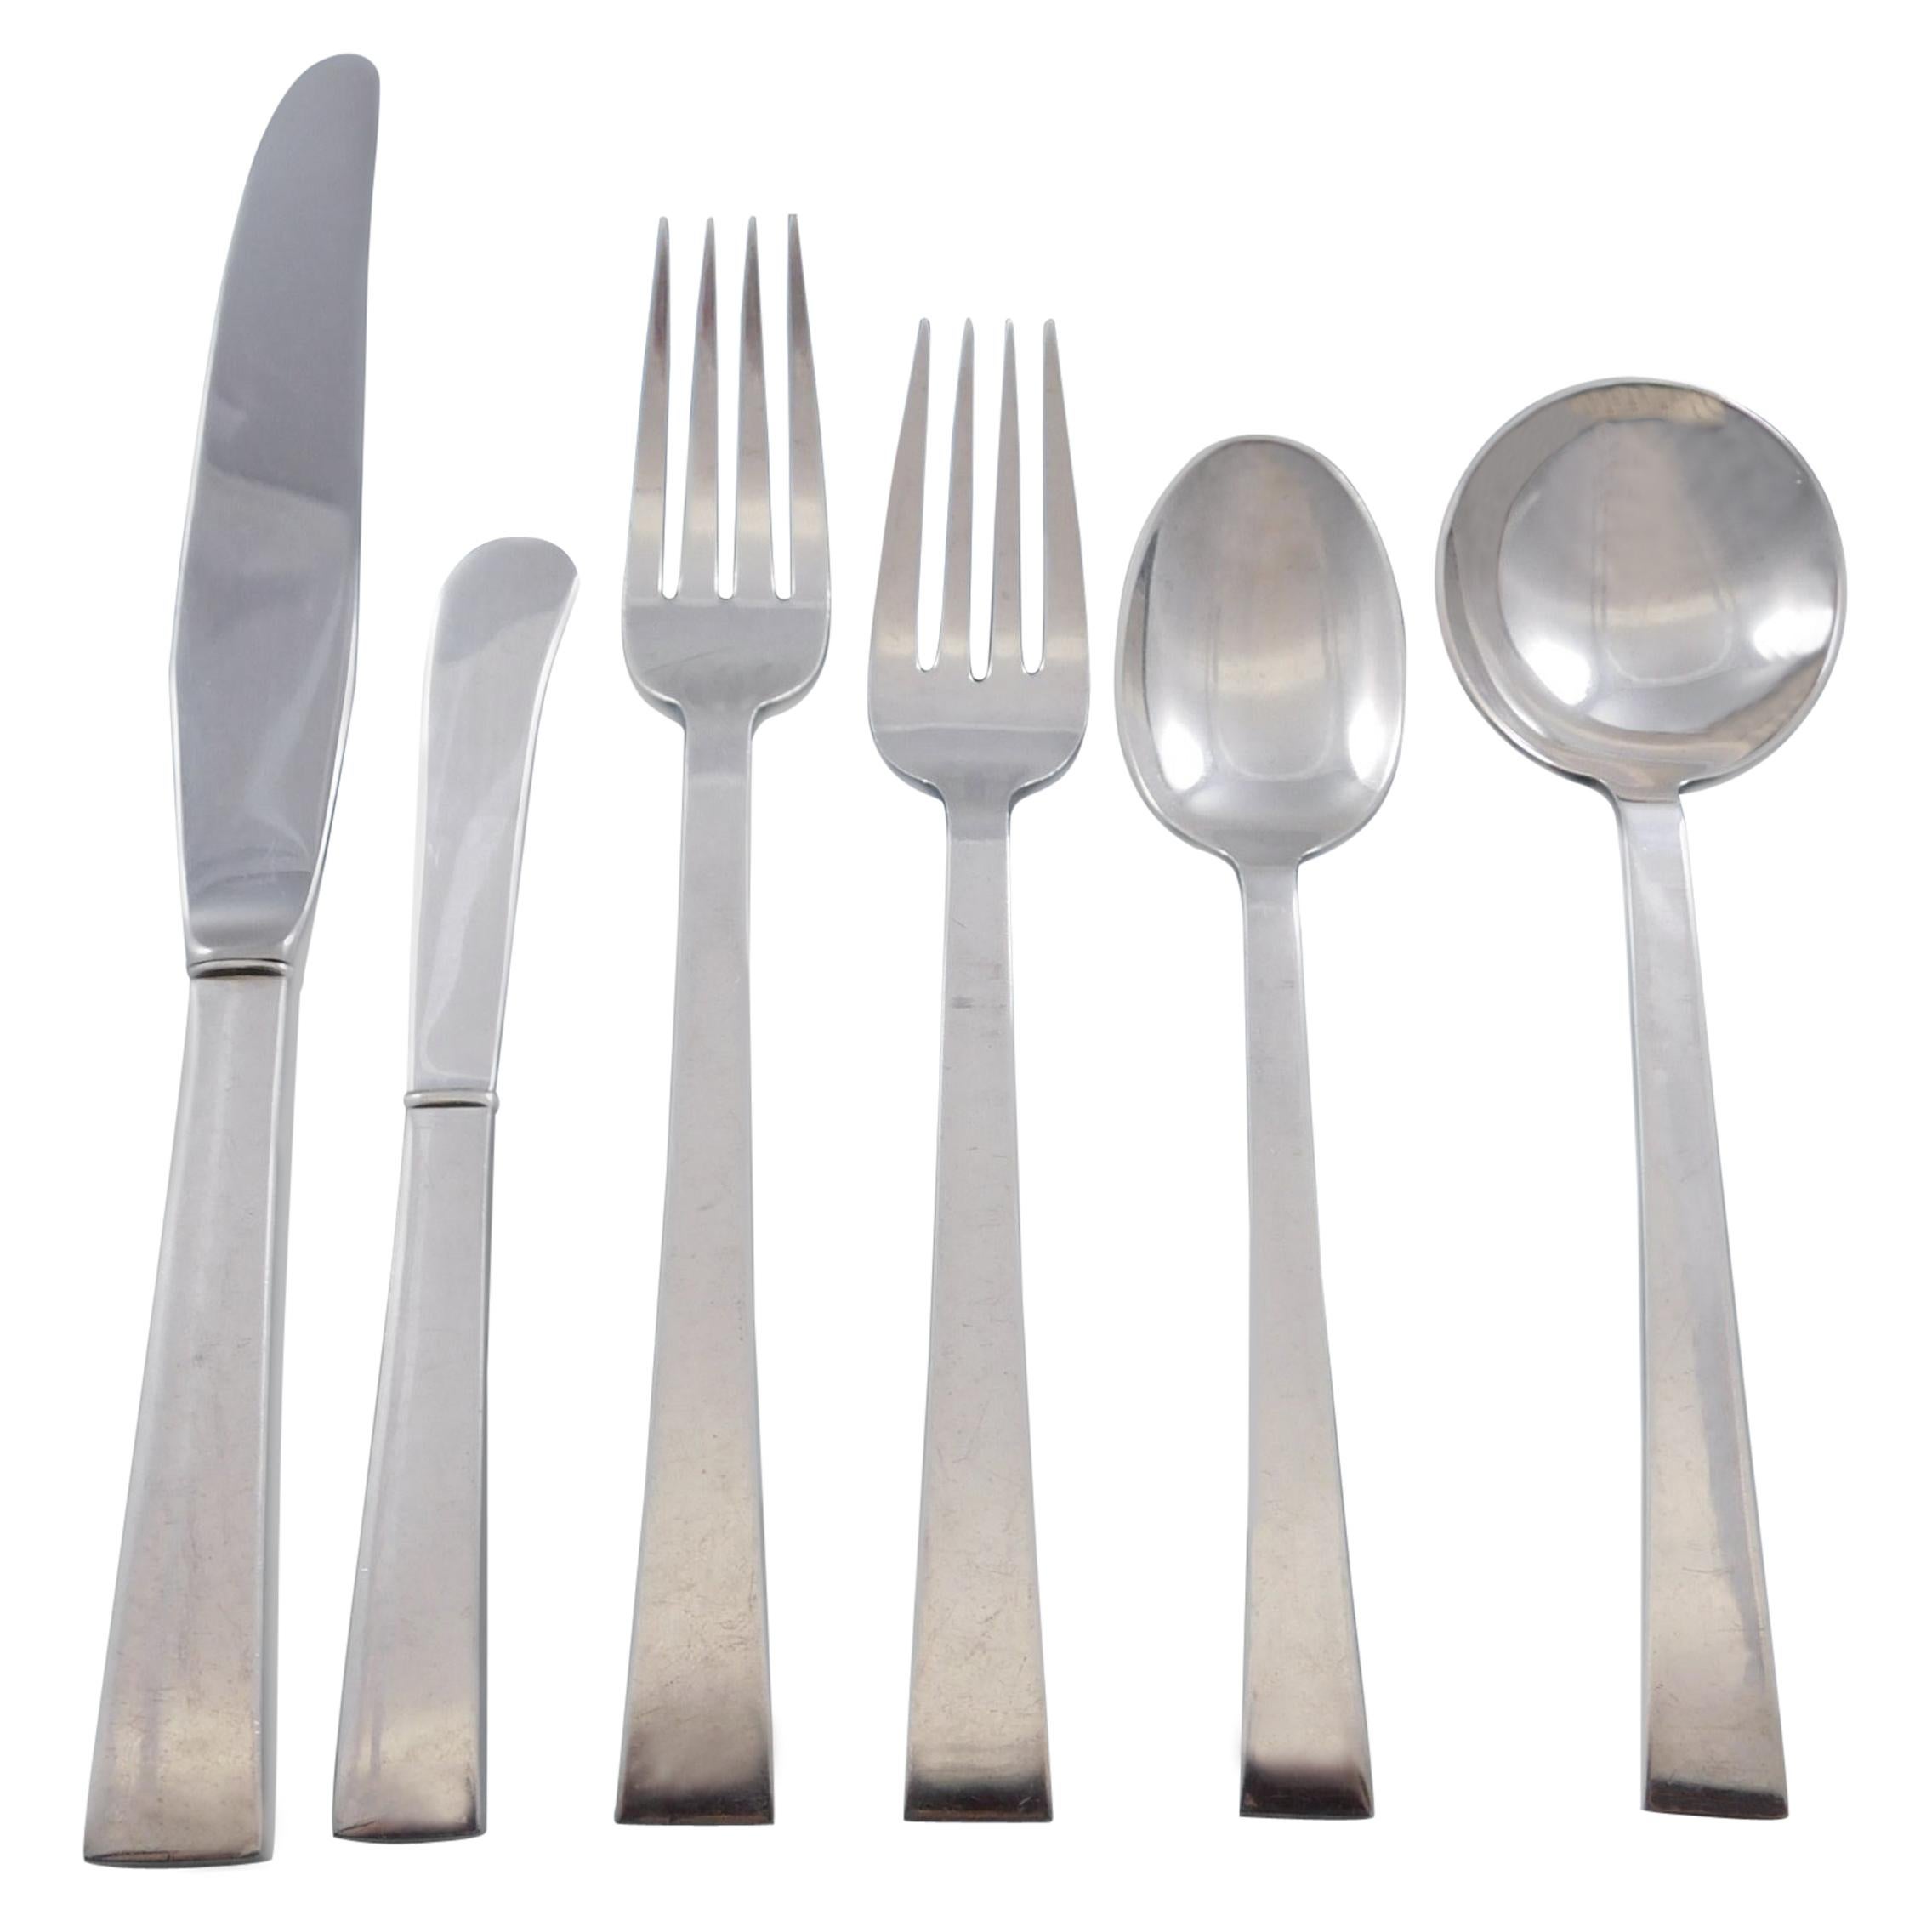 Continental by International Sterling Silver Flatware Service for 12 Set 77 Pcs